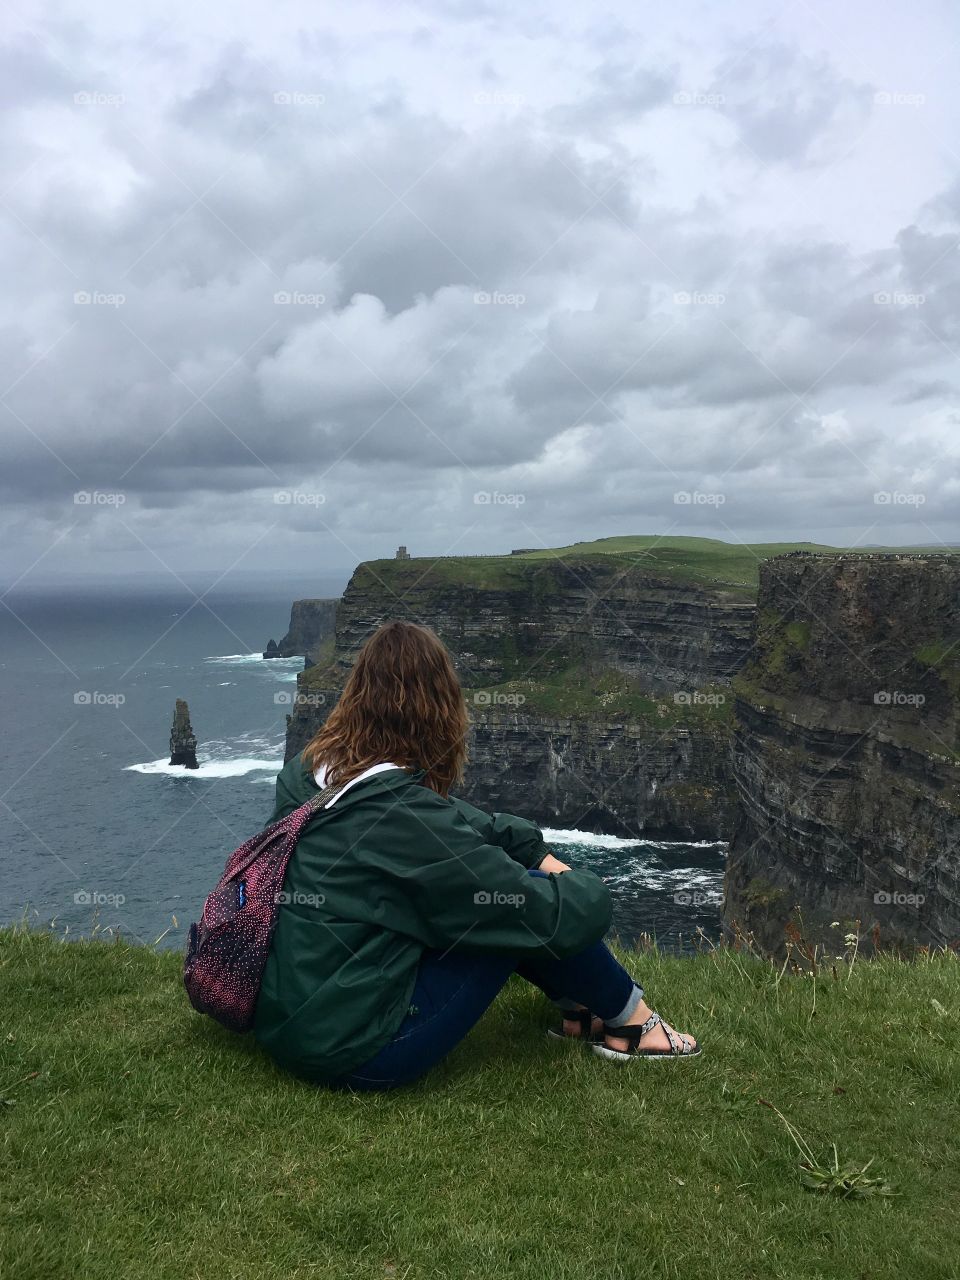 In awe of the Cliffs of Moher